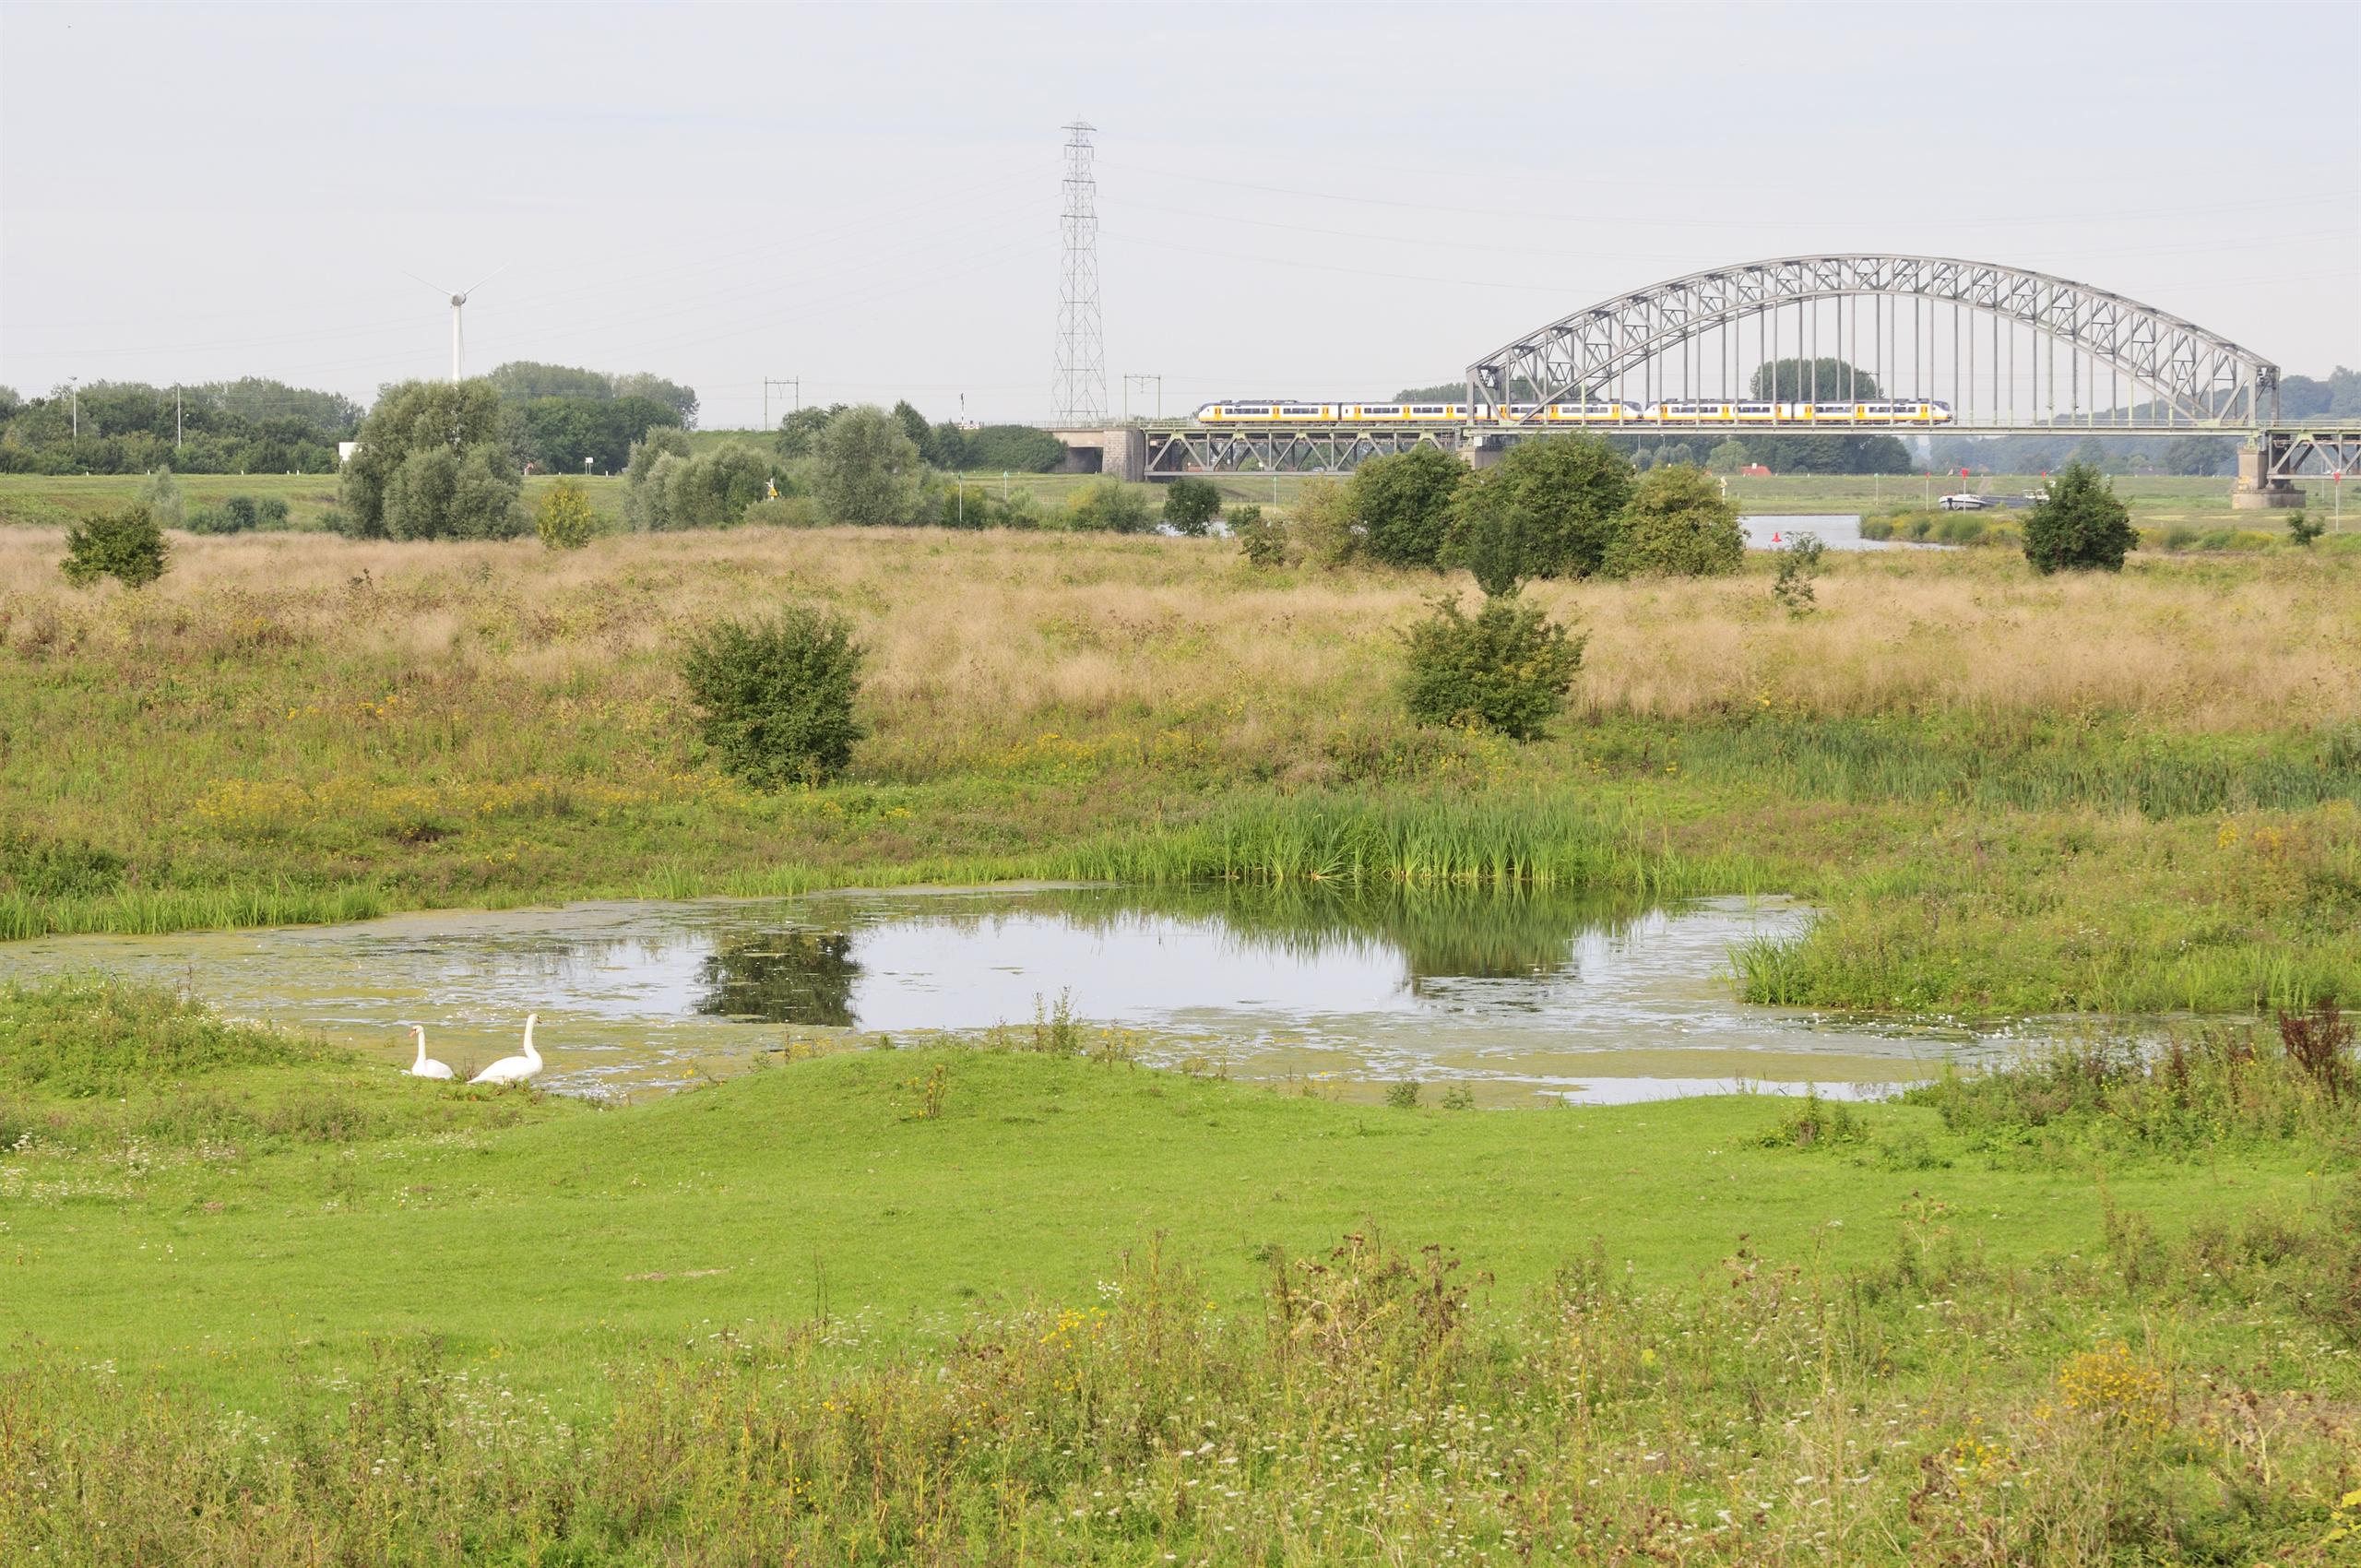 Mott MacDonald is leading efforts at two of the sites along major Rhine branches: at Meinerswijk, which is the floodplain of the Rhine within the City of Arnhem, and along 22 km of the lower River IJssel.